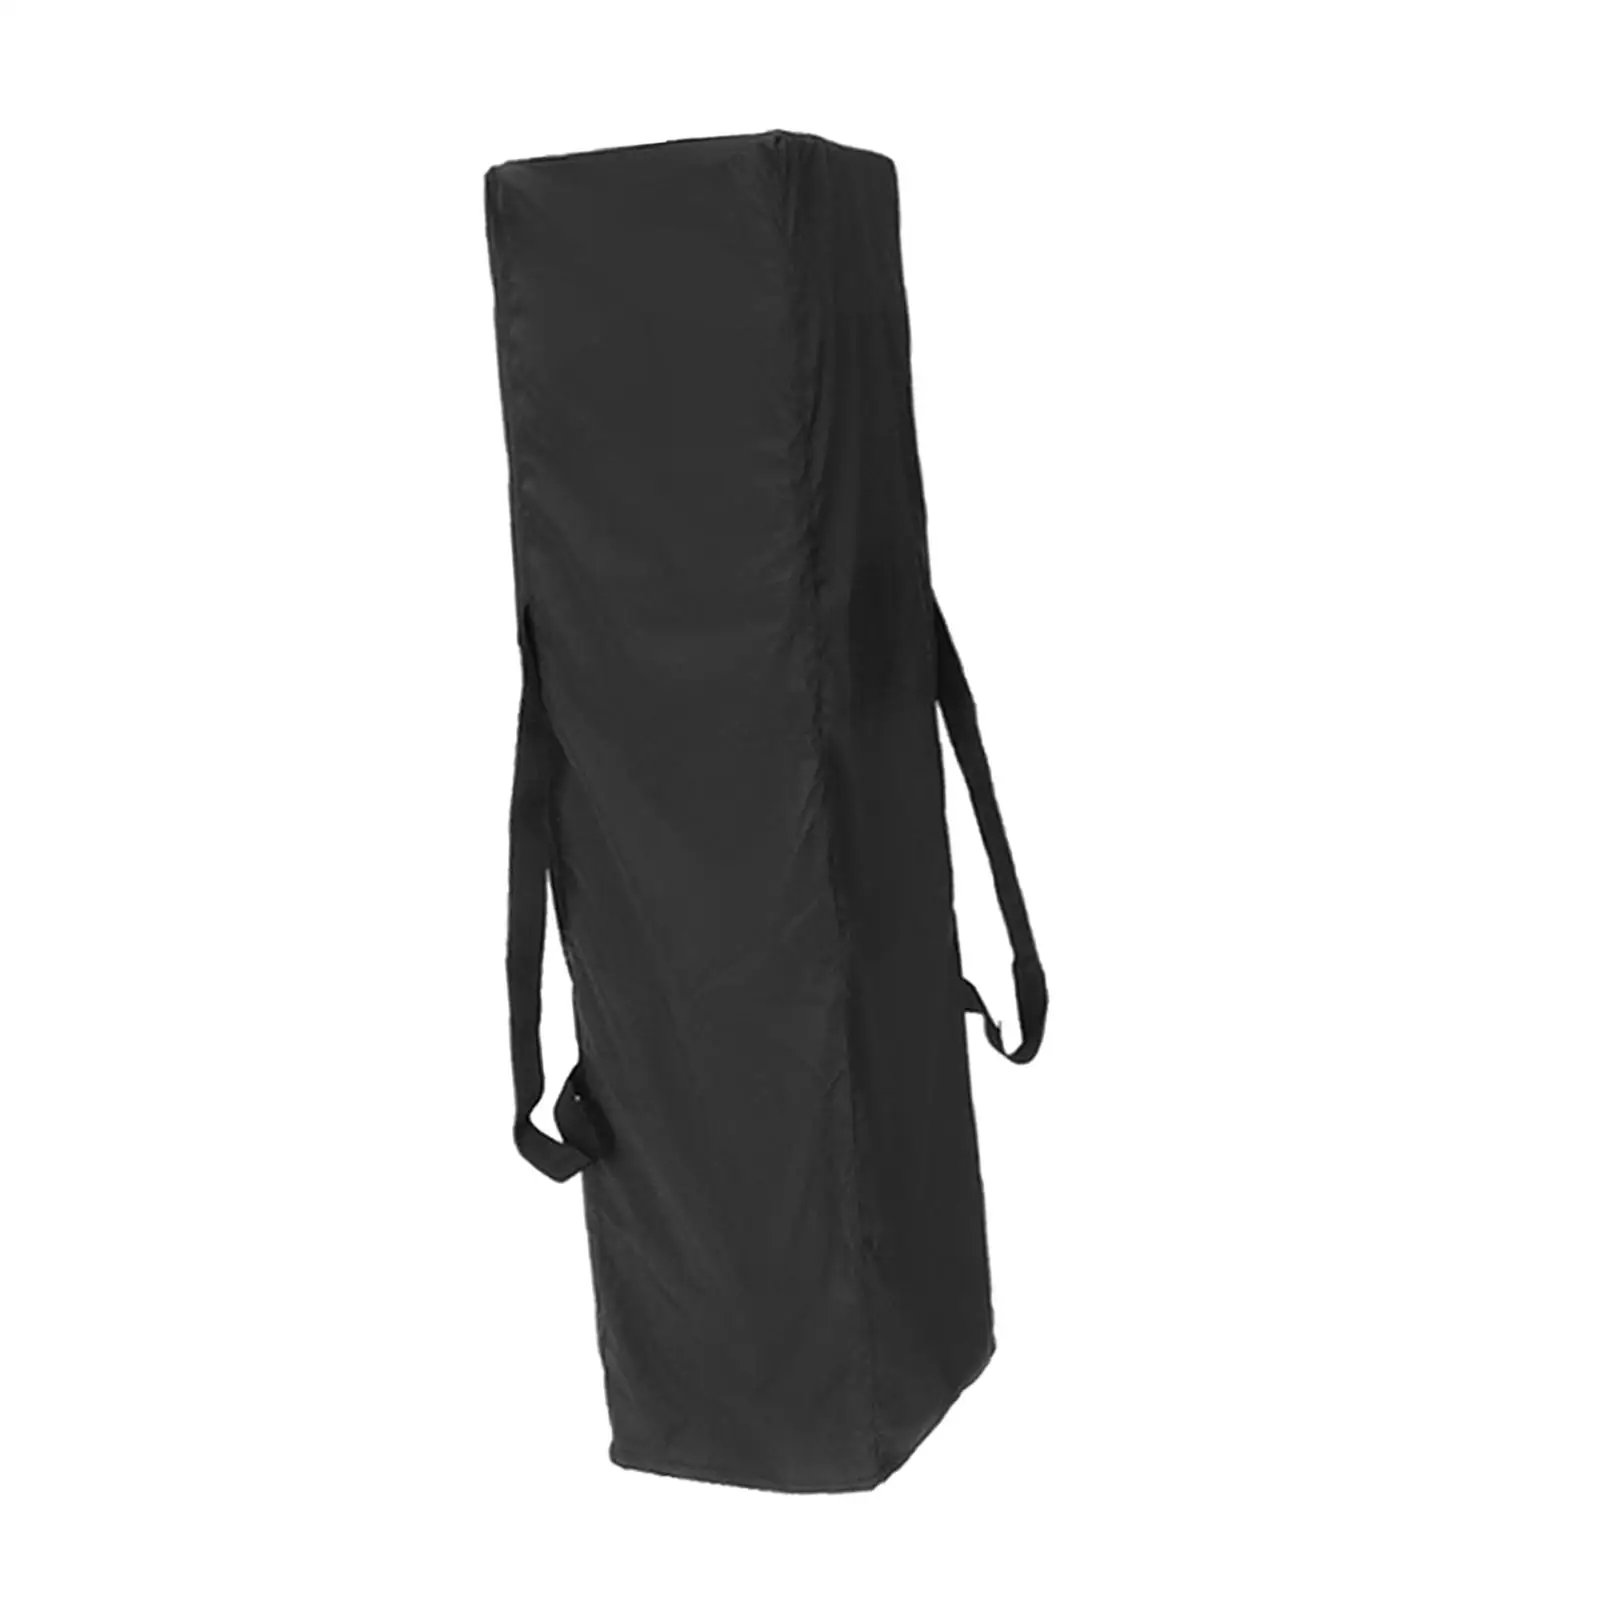  Roller Bag for Up Canopy Tent Storage Bag with Handle